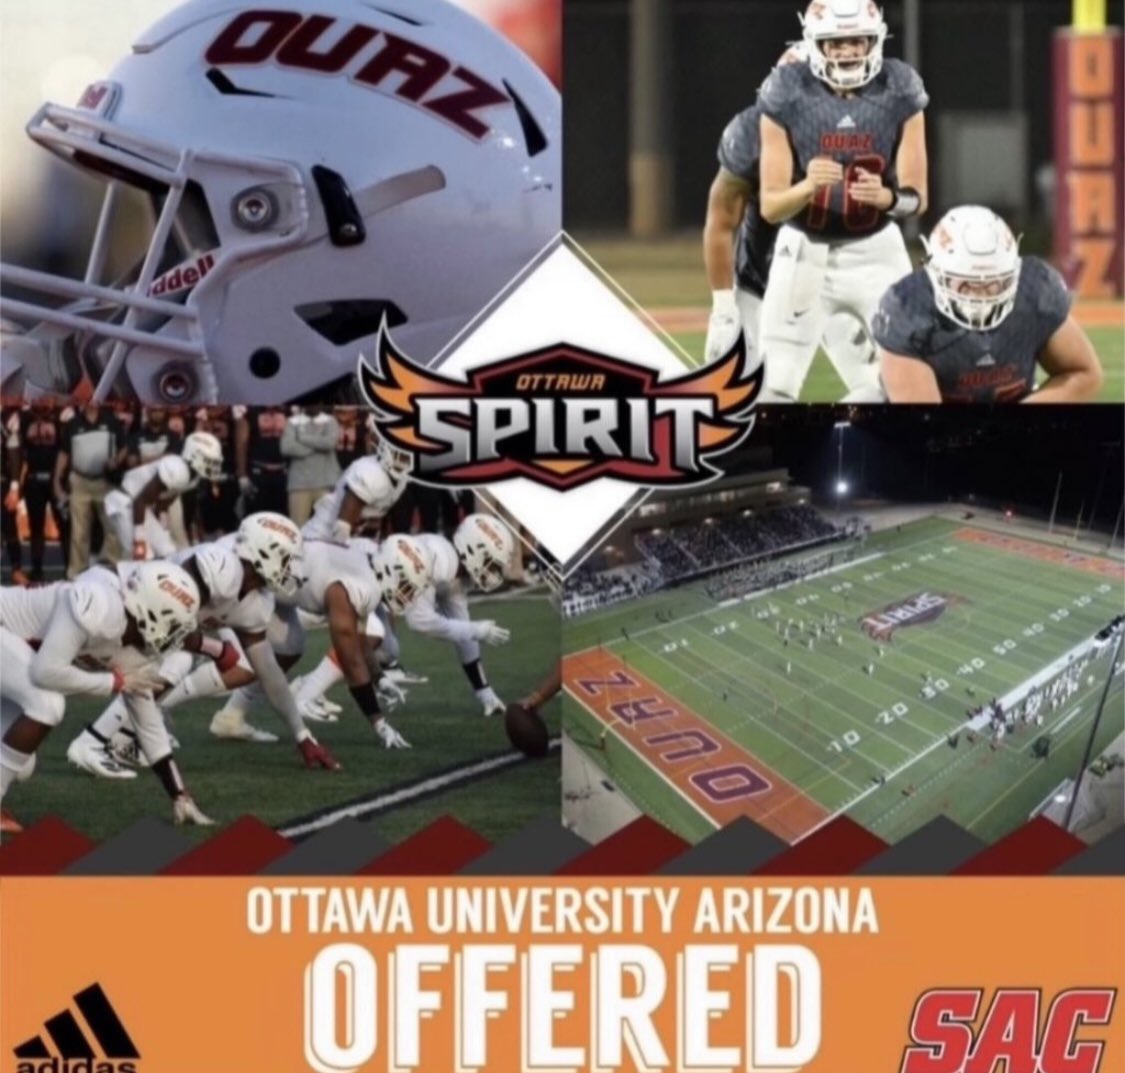 After a great conversation with @CoachVizcaya20 I am blessed to announce that I have received my first official offer from Ottowa University Arizona!!! #WeAreOUAZ
@Coach_Nesbitt @Coach_Jmanzo @OUAZFootball @MyRecruits_ @PrepRedzoneNM @coachsalinas_